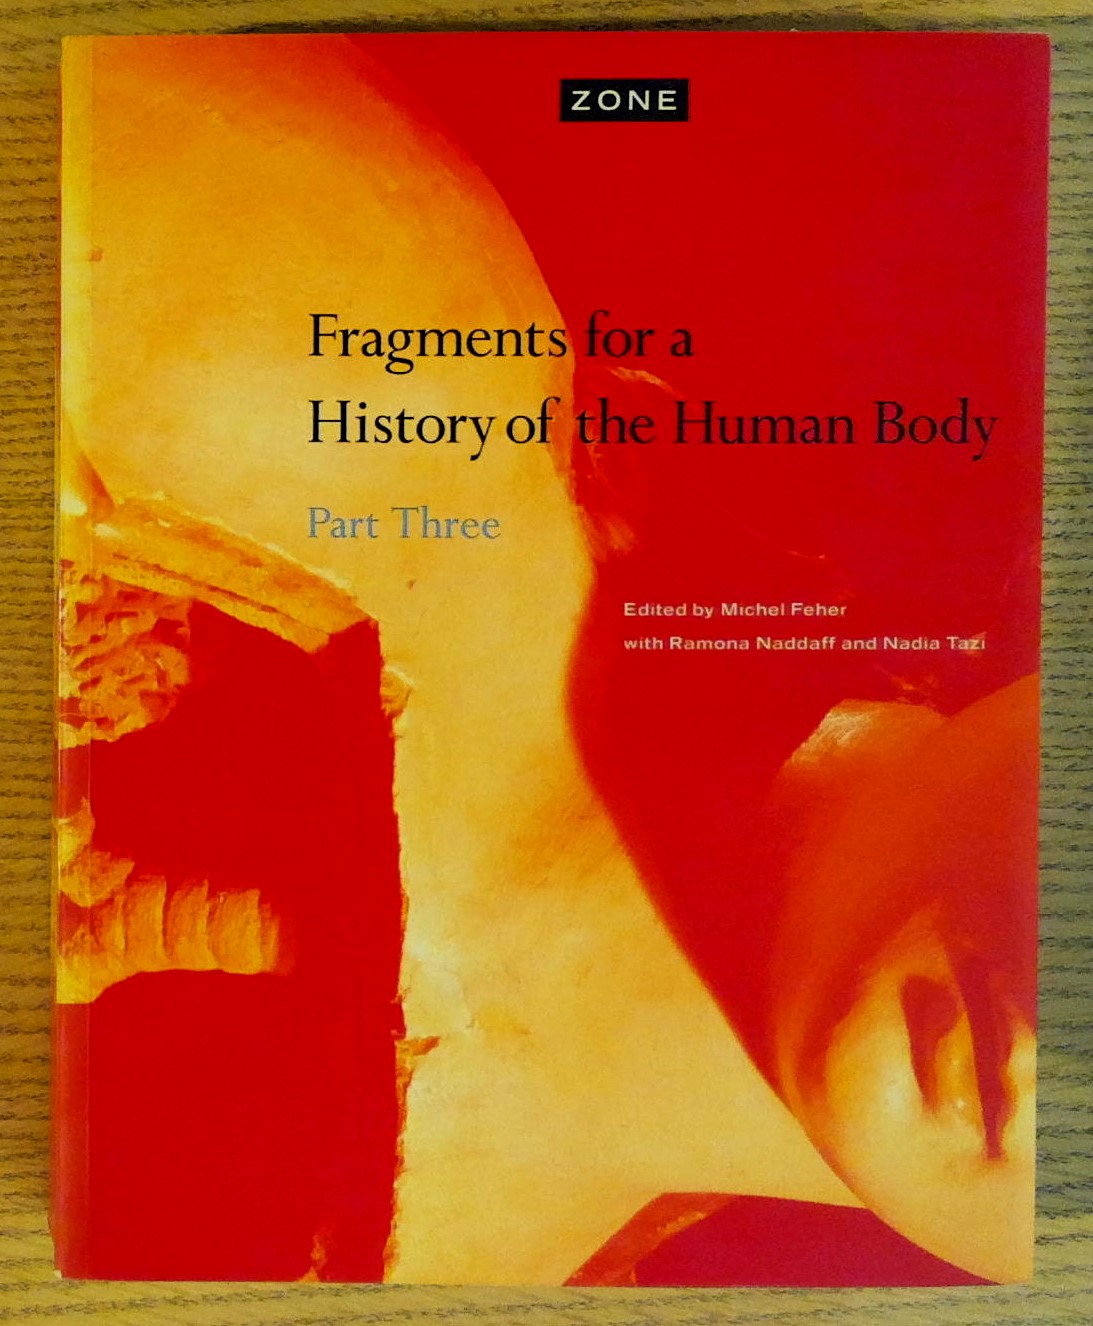 Image for Fragments for a History of the Human Body (Pt. II: Zone Four) (Fragments for a History of the Human Body , Part Three